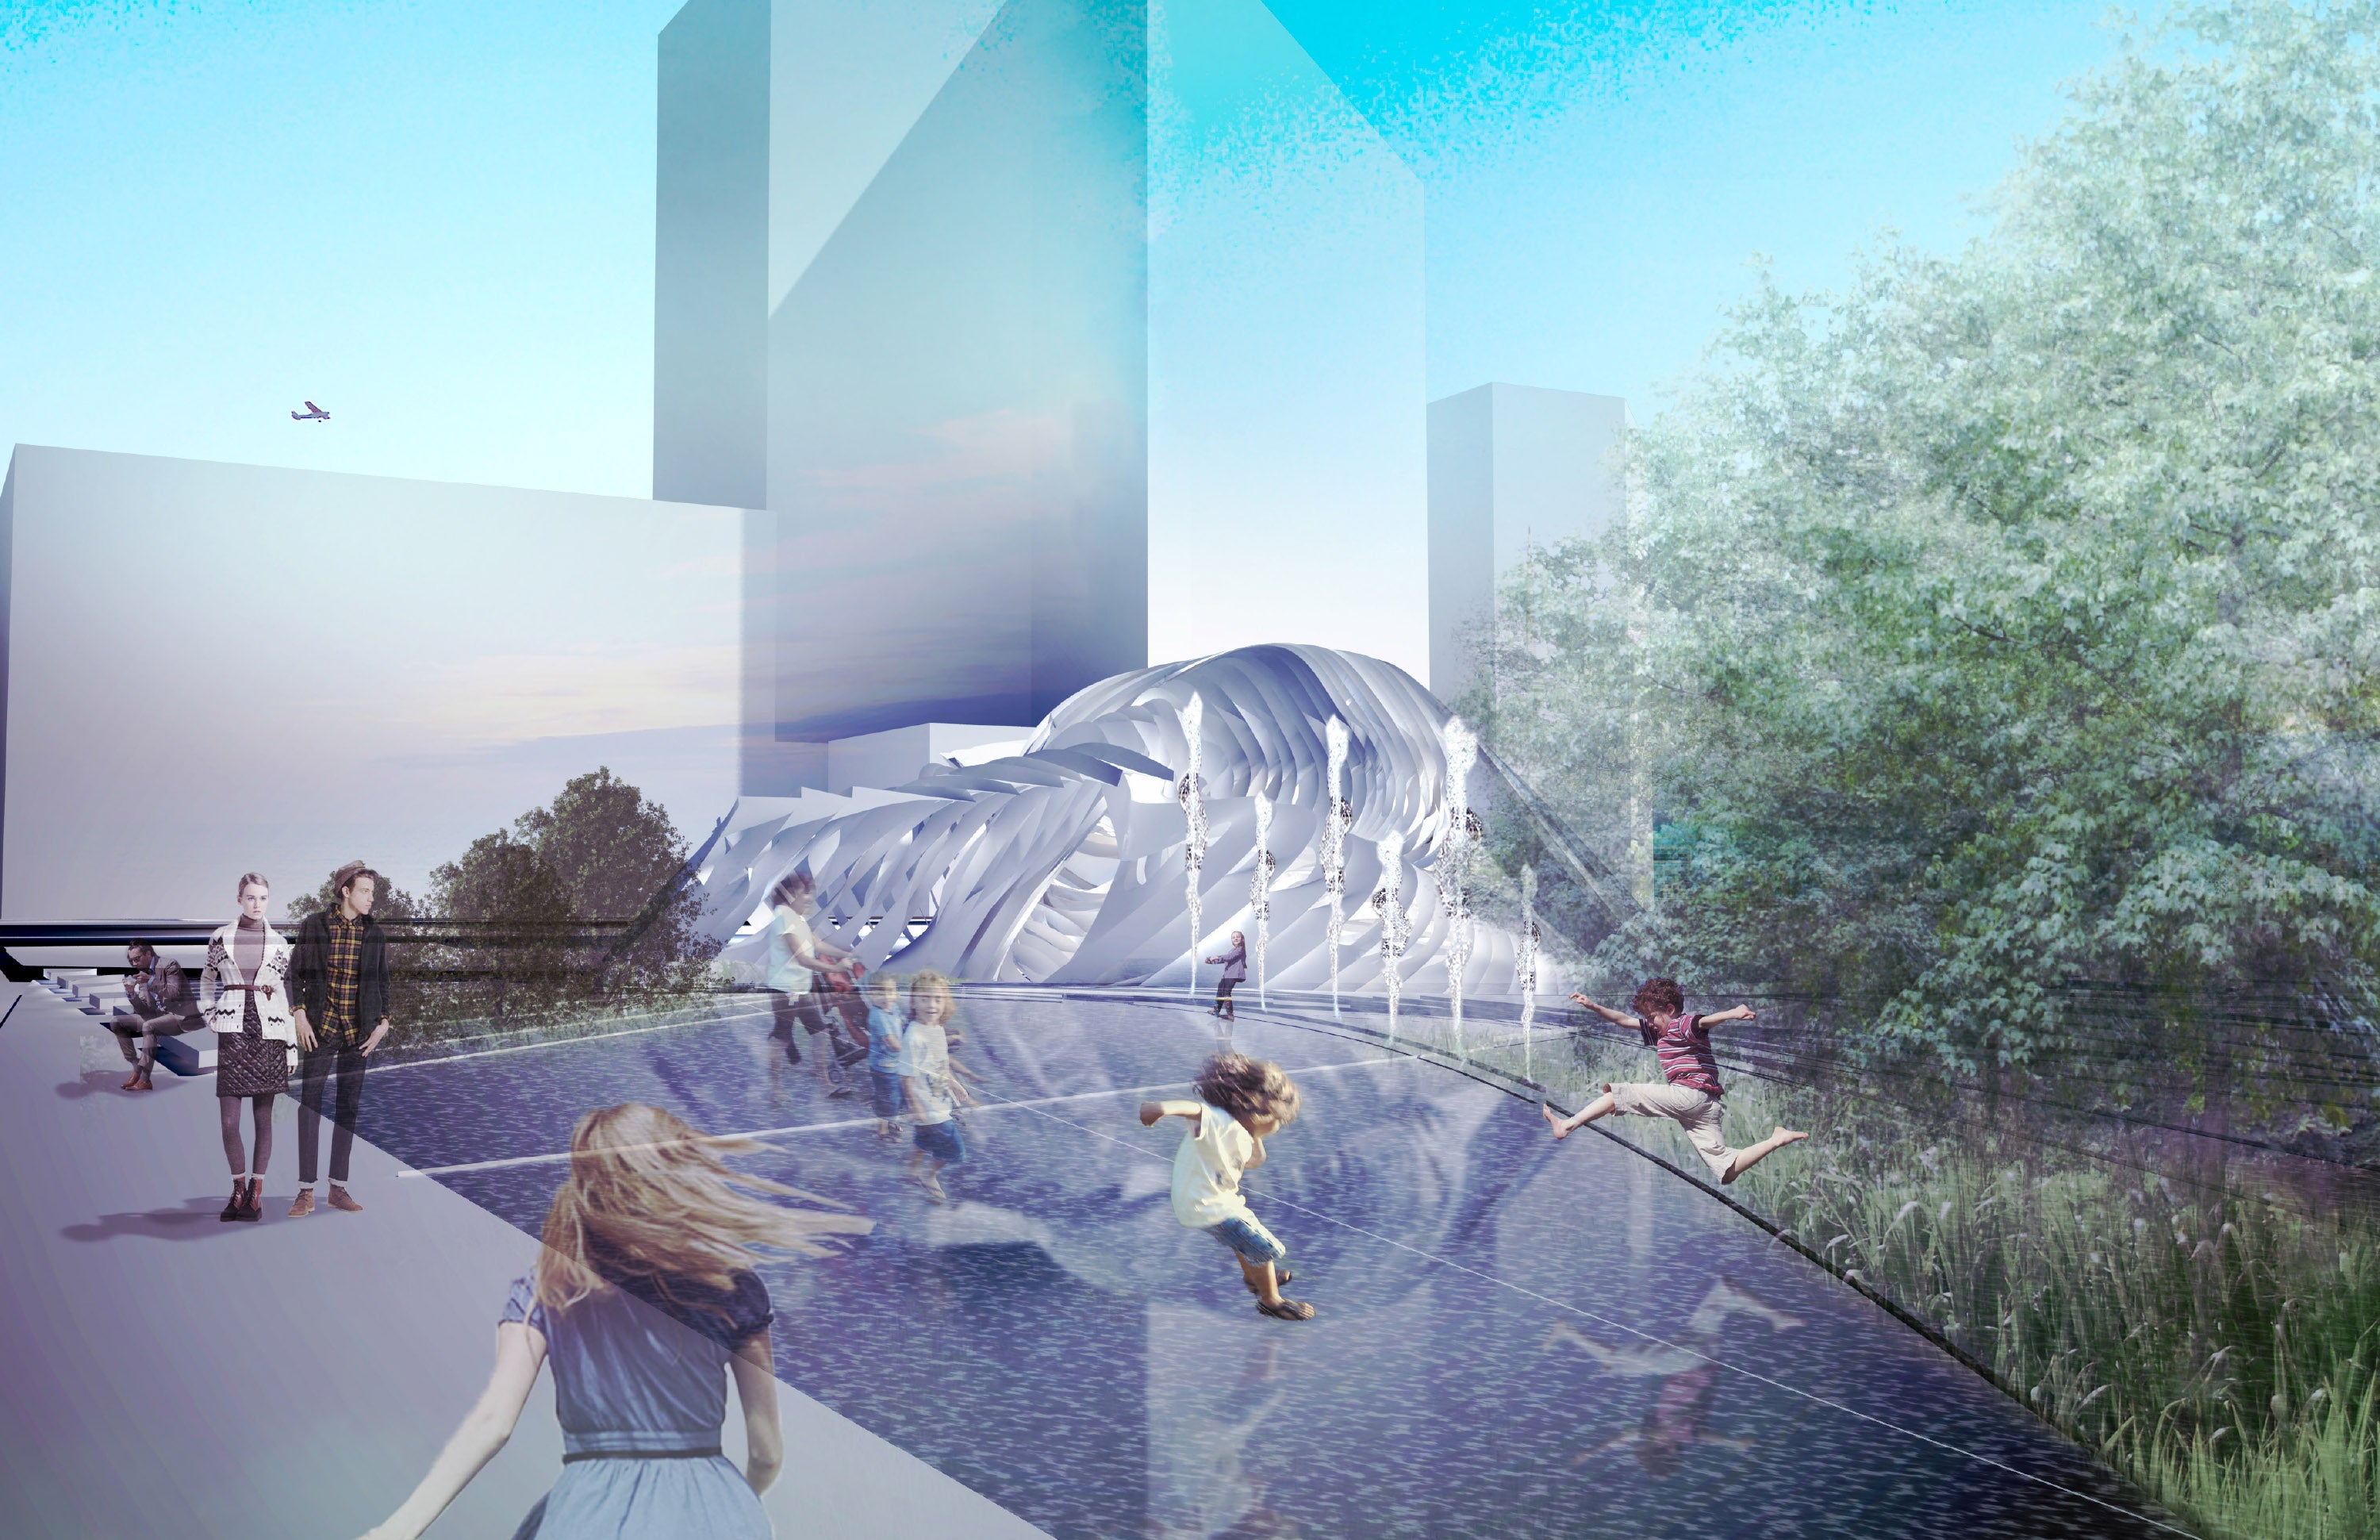 An exterior render of the building with a shallow pool as part of the public space landscaping.